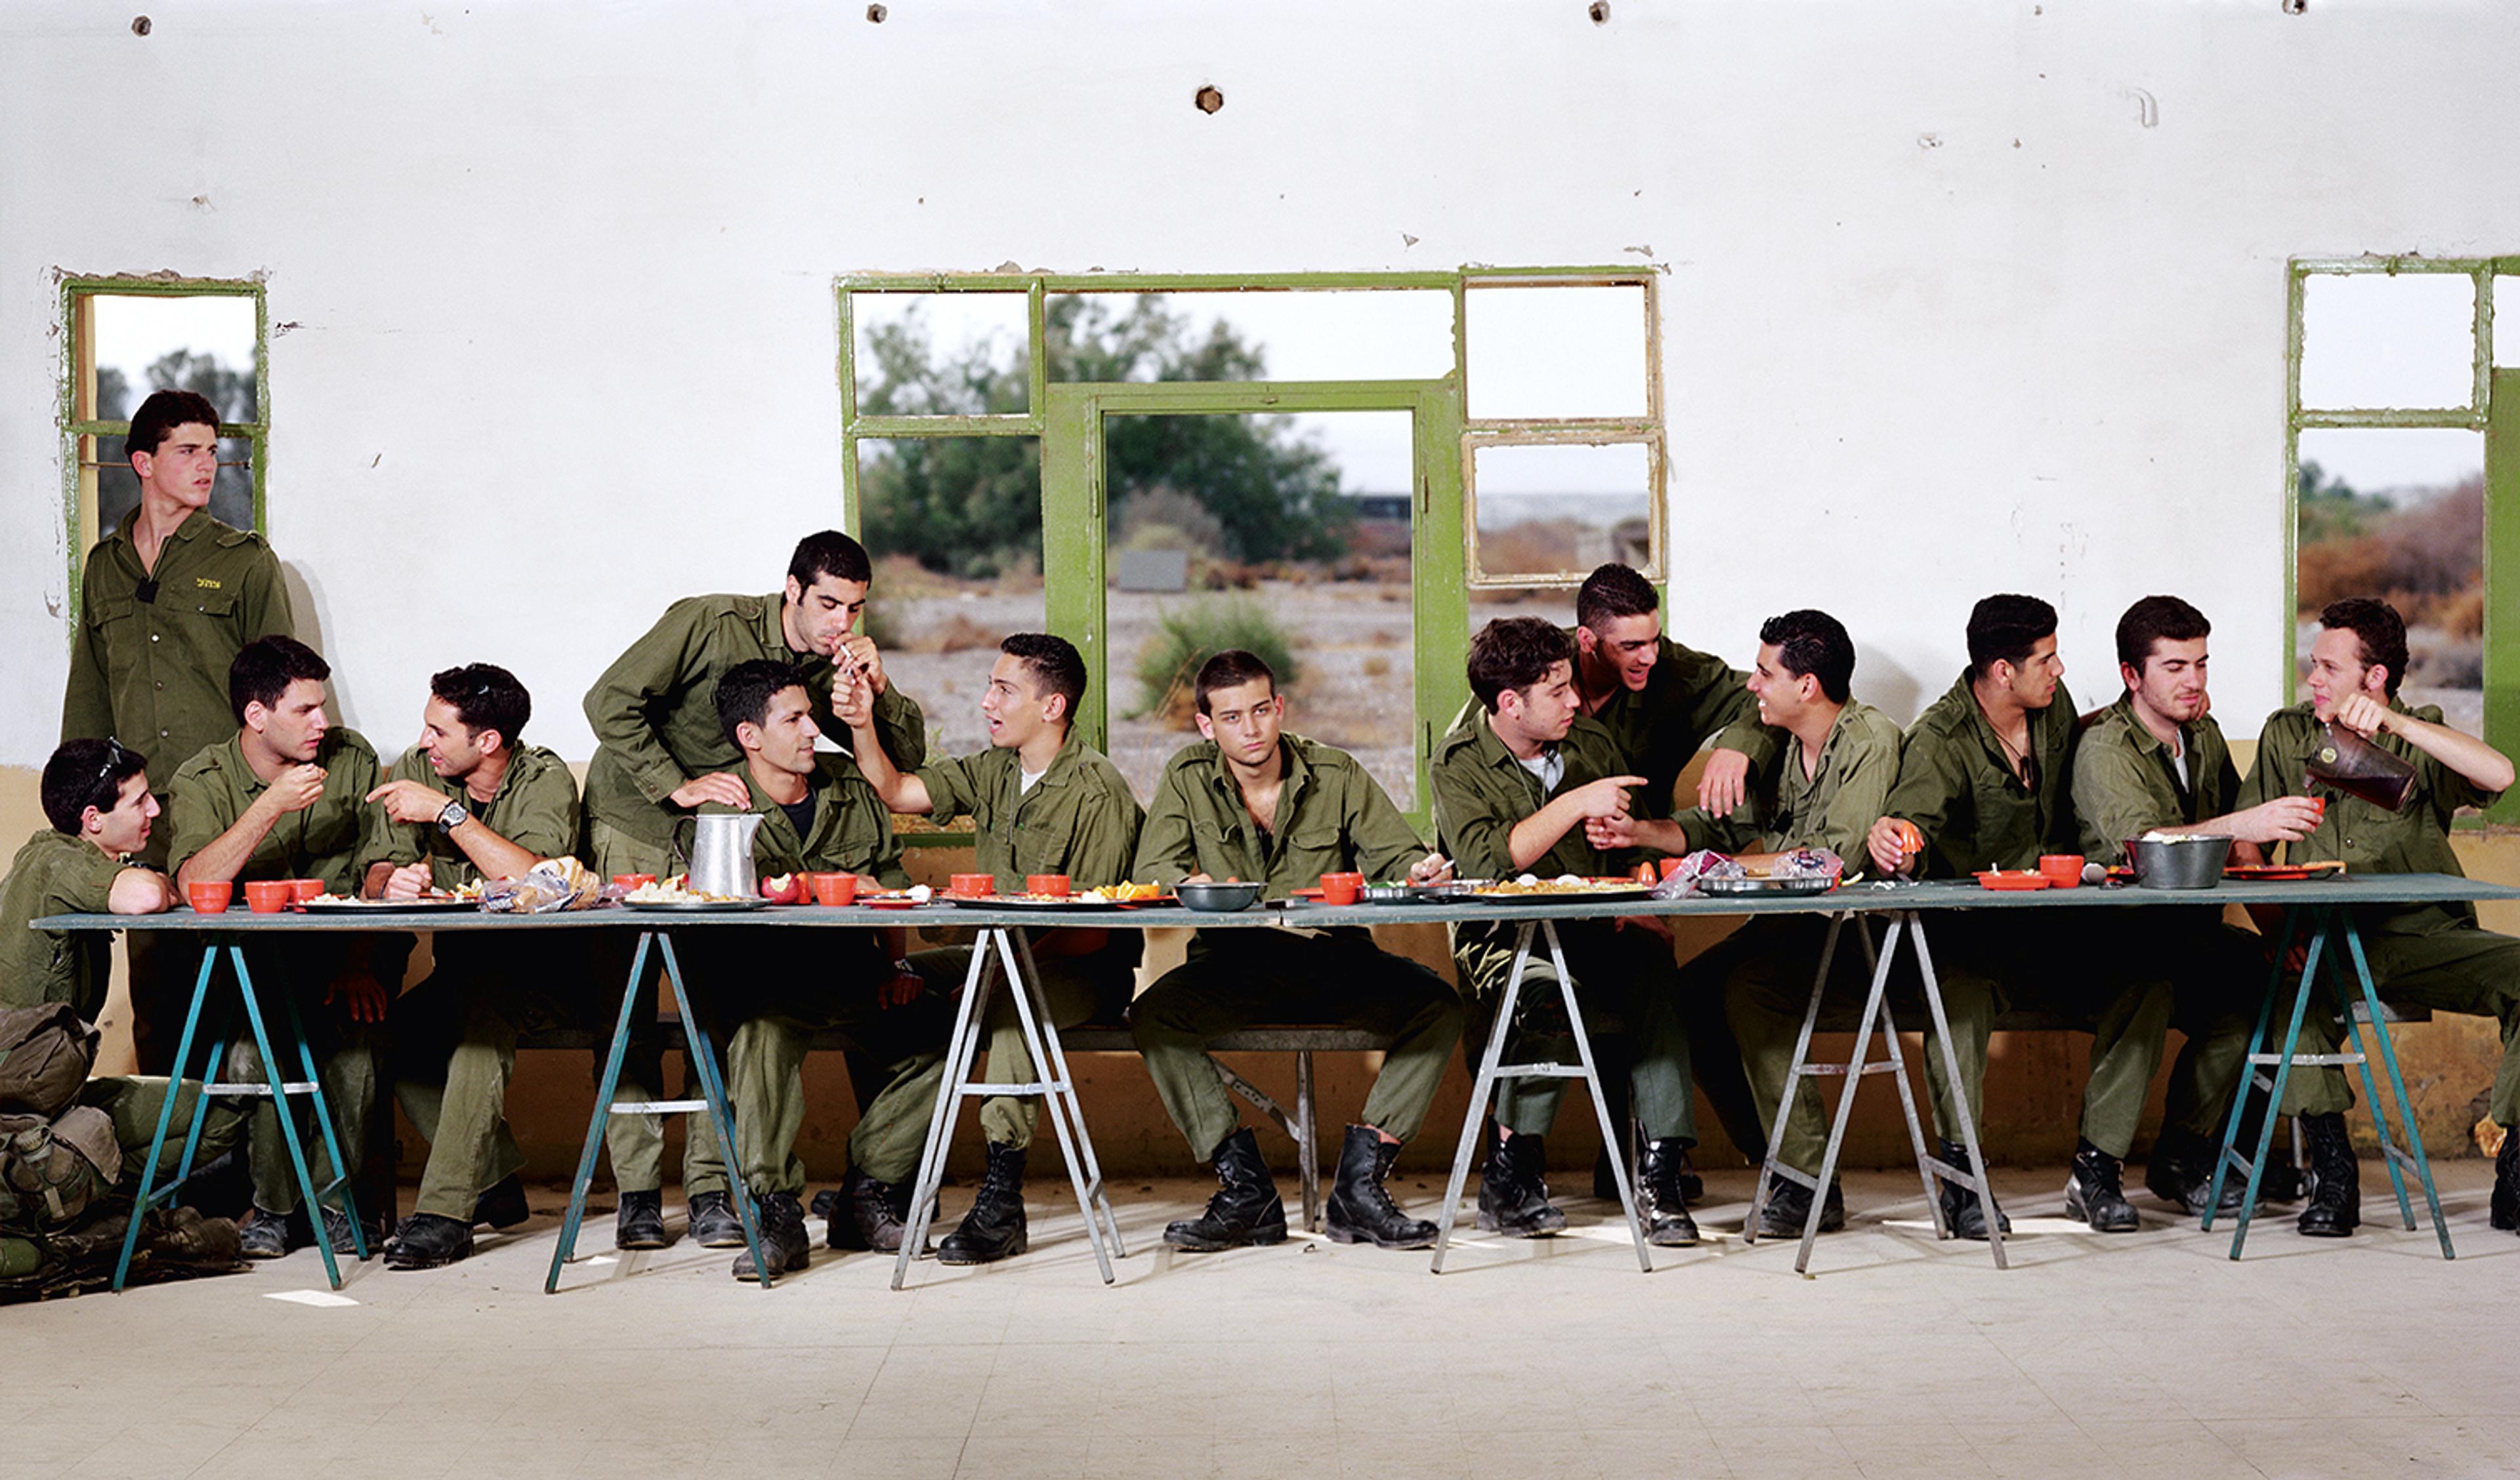 A photograph of men in military uniform at a long dinner table, reminiscent of The Last Supper